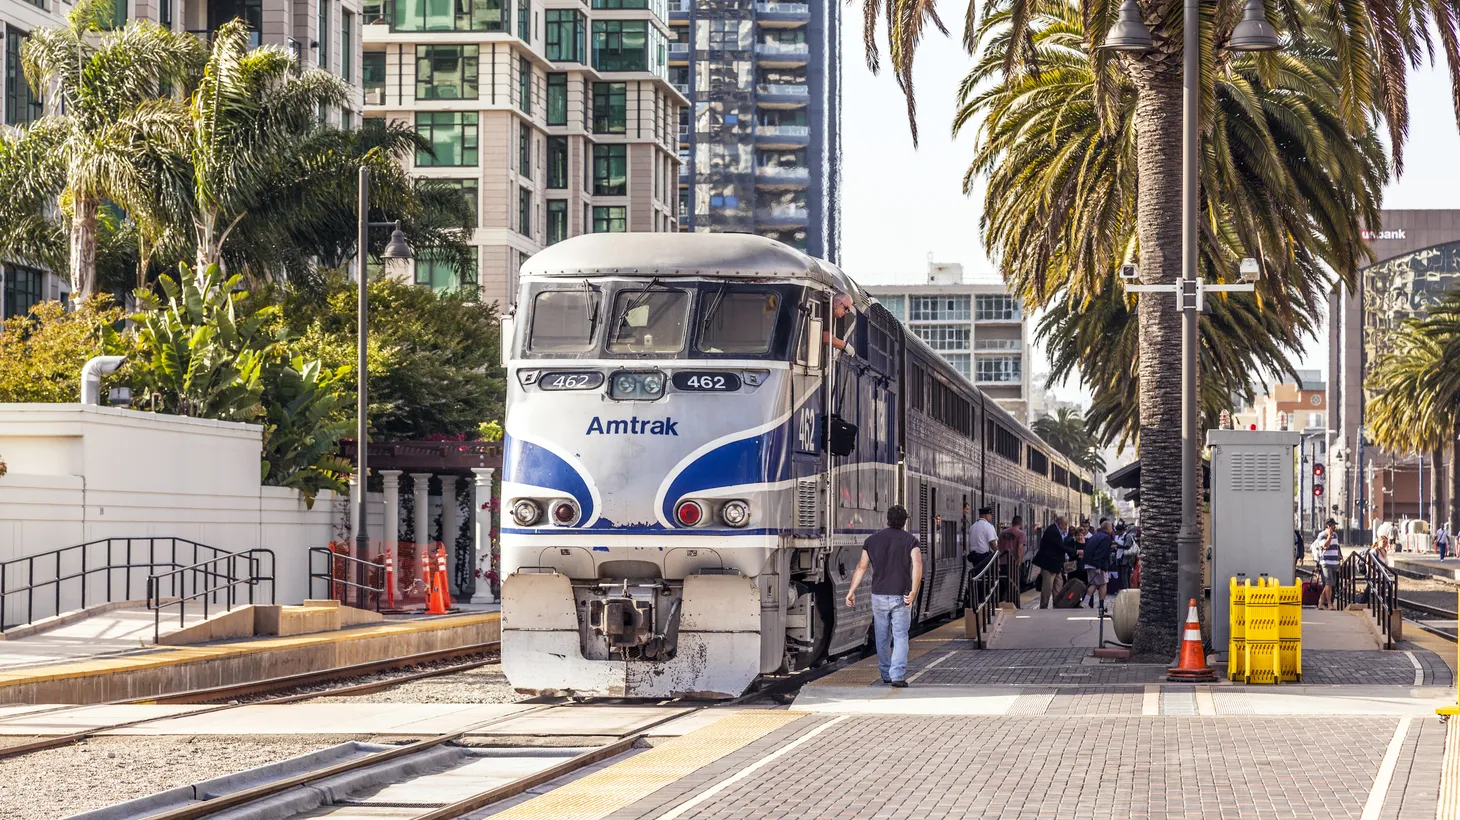 An Amtrak train is seen at Union Station in San Diego. “The coast has been eroding for decades, so where you used to have sand way out there, now the waves are actually starting to shift the rails themself,” says Gustavo Arellano.